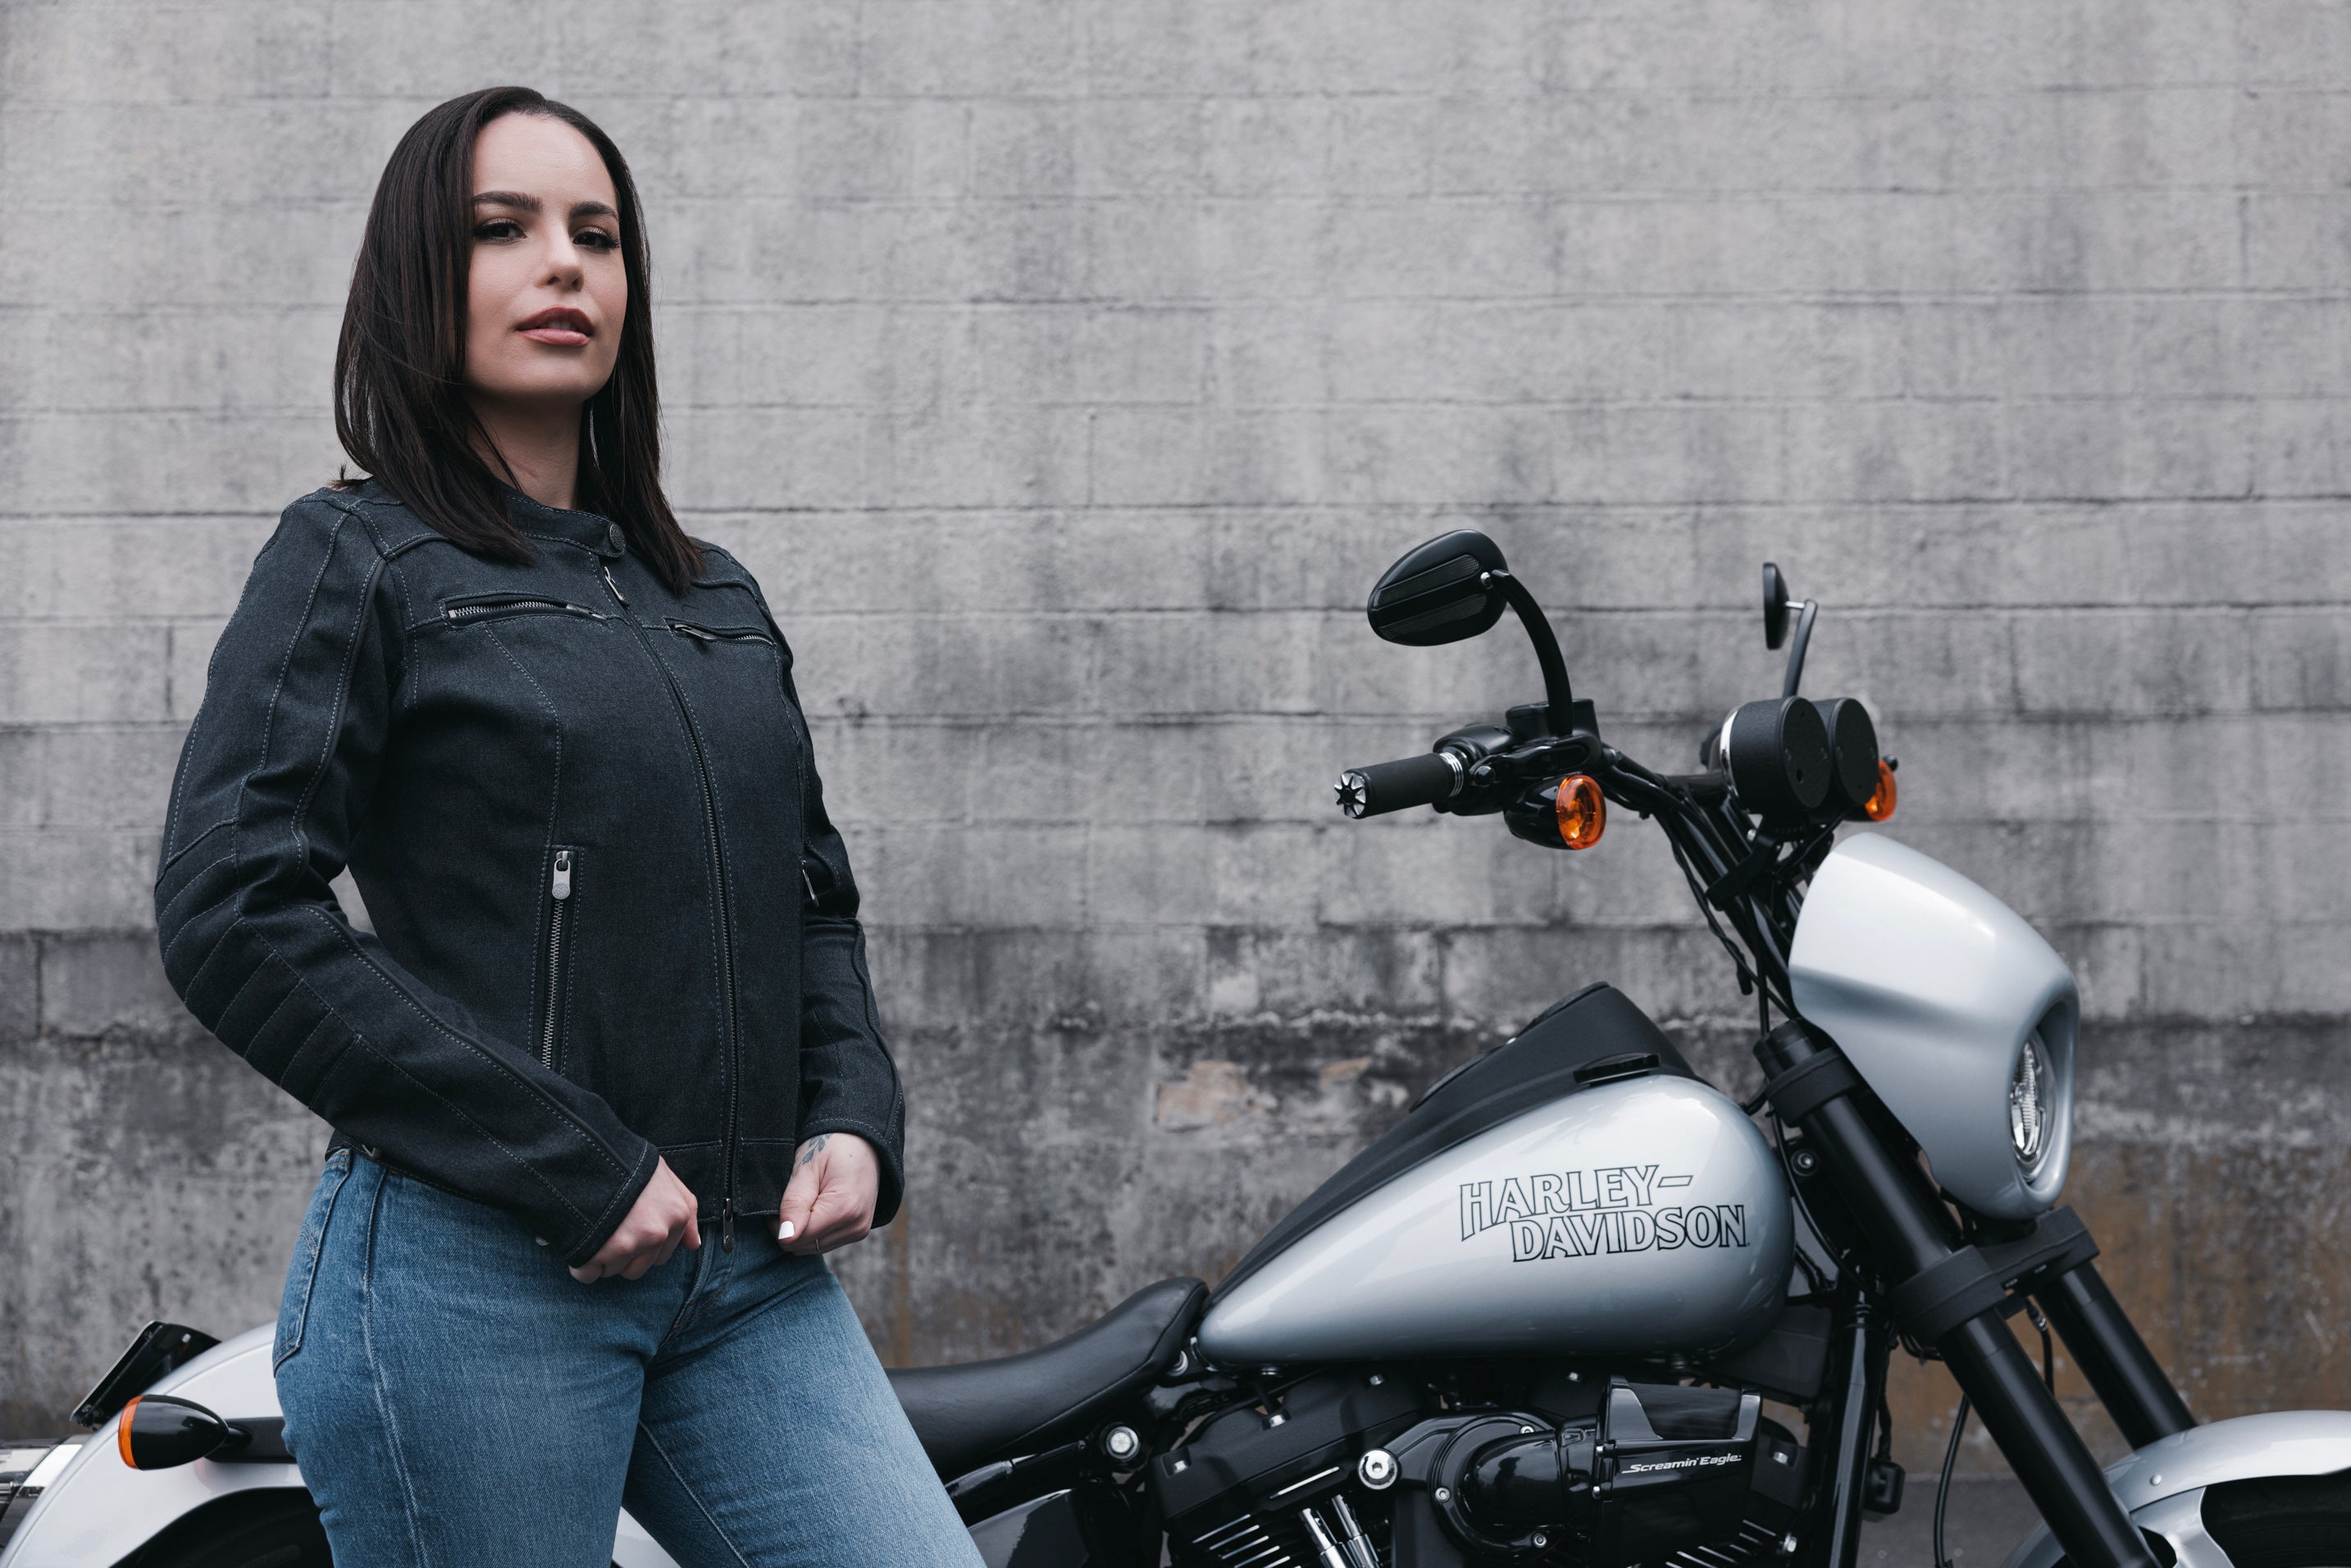 GoGo Gear Motorcycle Jackets - Stylish Safety for Women Riders